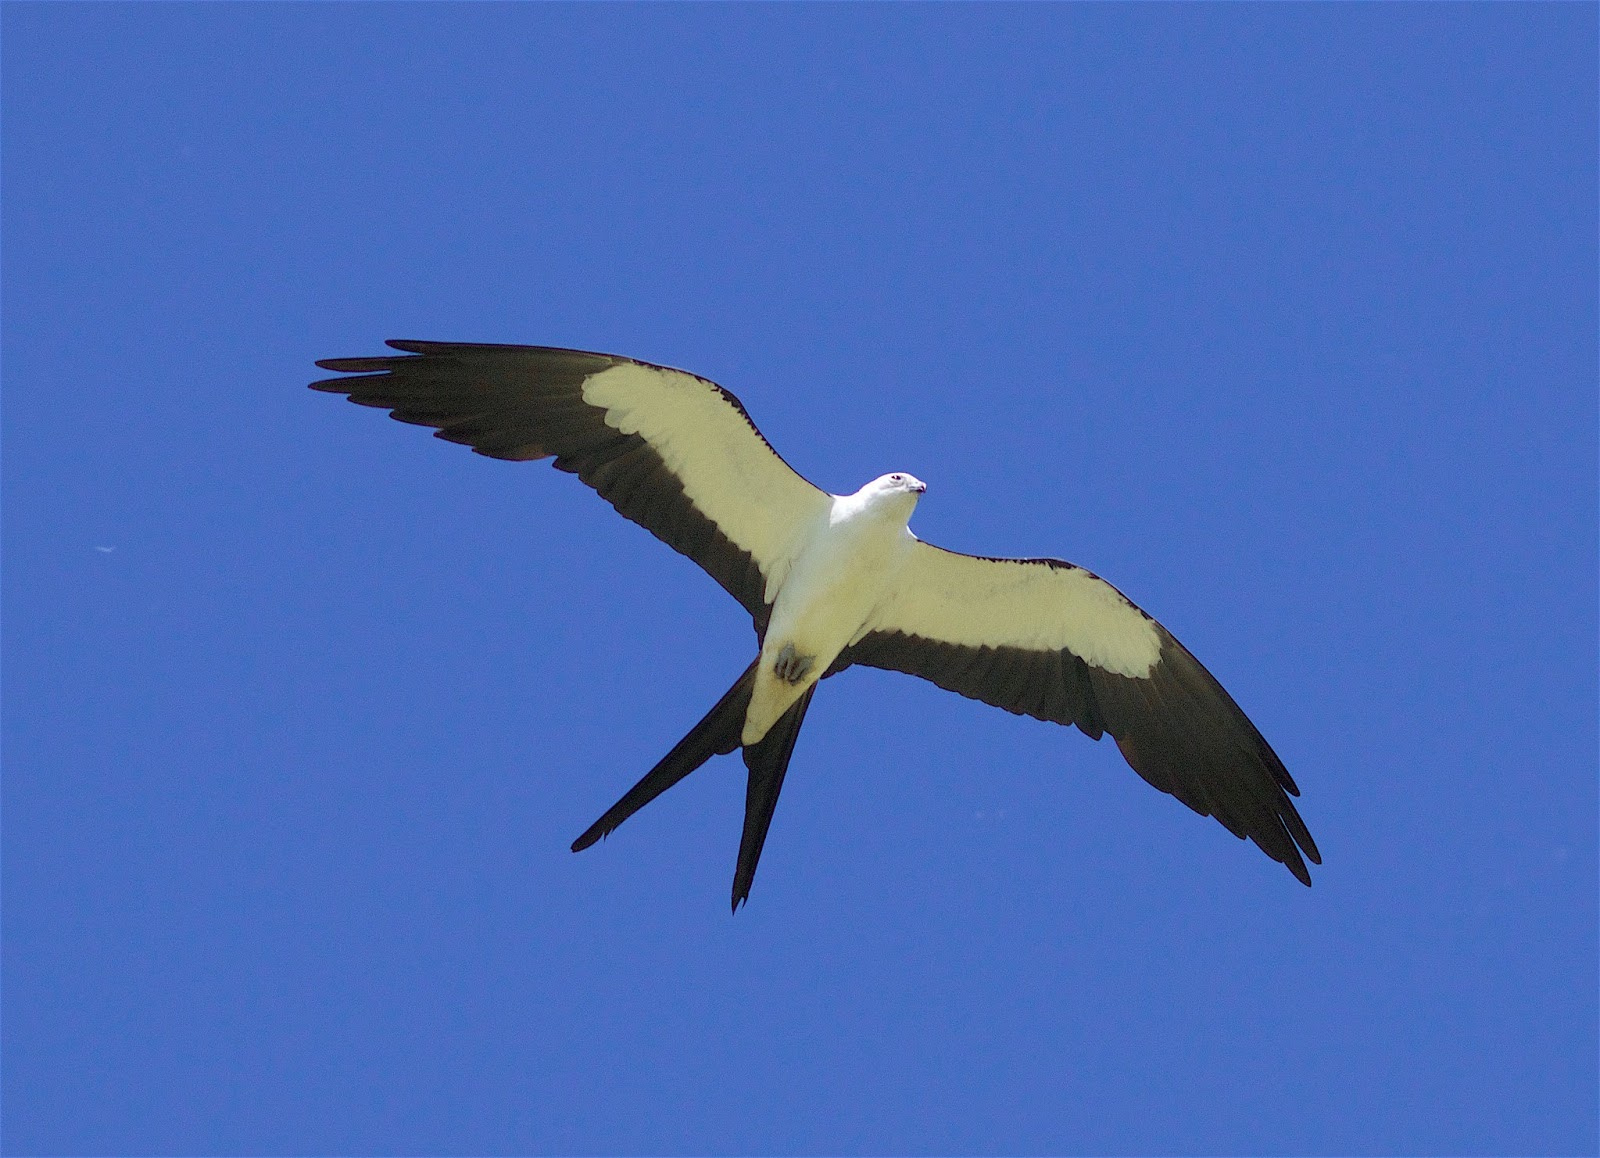 A white bird with a black outline on its wings and bodies, with a v-shaped tail flying overhead